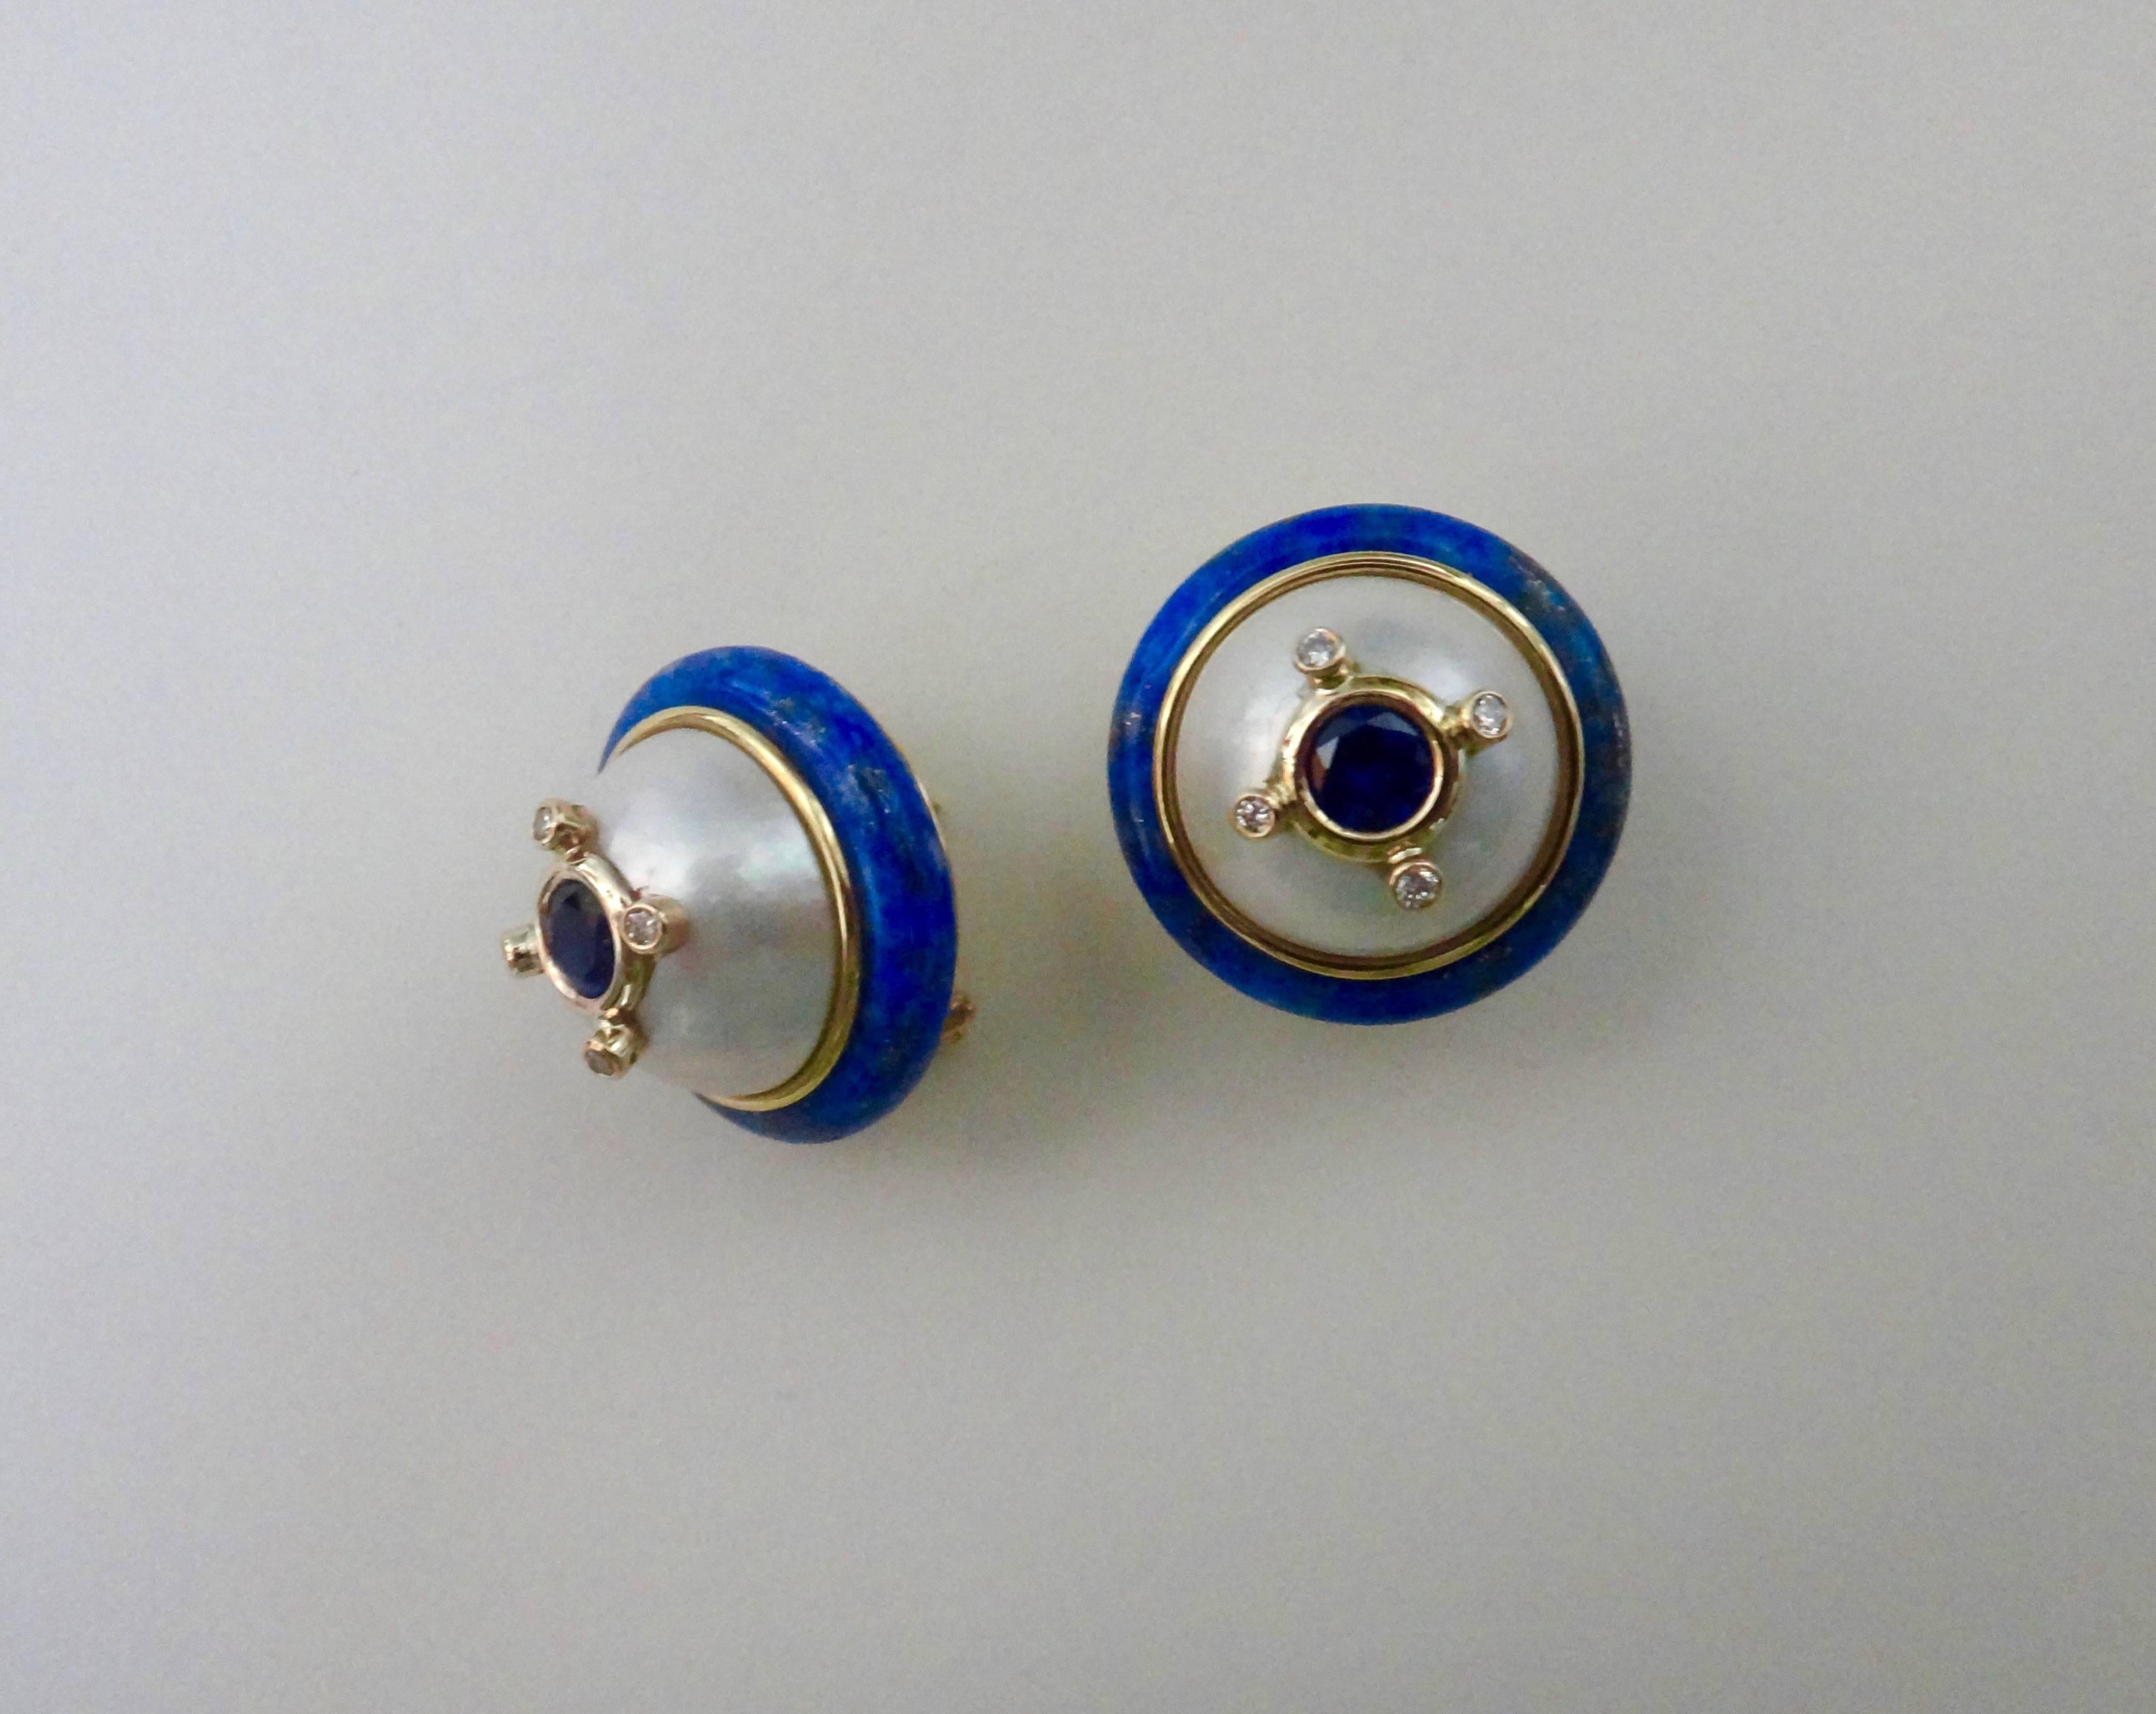 Blue sapphires are bezel set and embellished with white diamonds, all of which are mounted on a huge pair of mobe pearls. The compositions are framed with lapis lazuli in these stylish button earrings.  The mountings are fabricated in 18k yellow